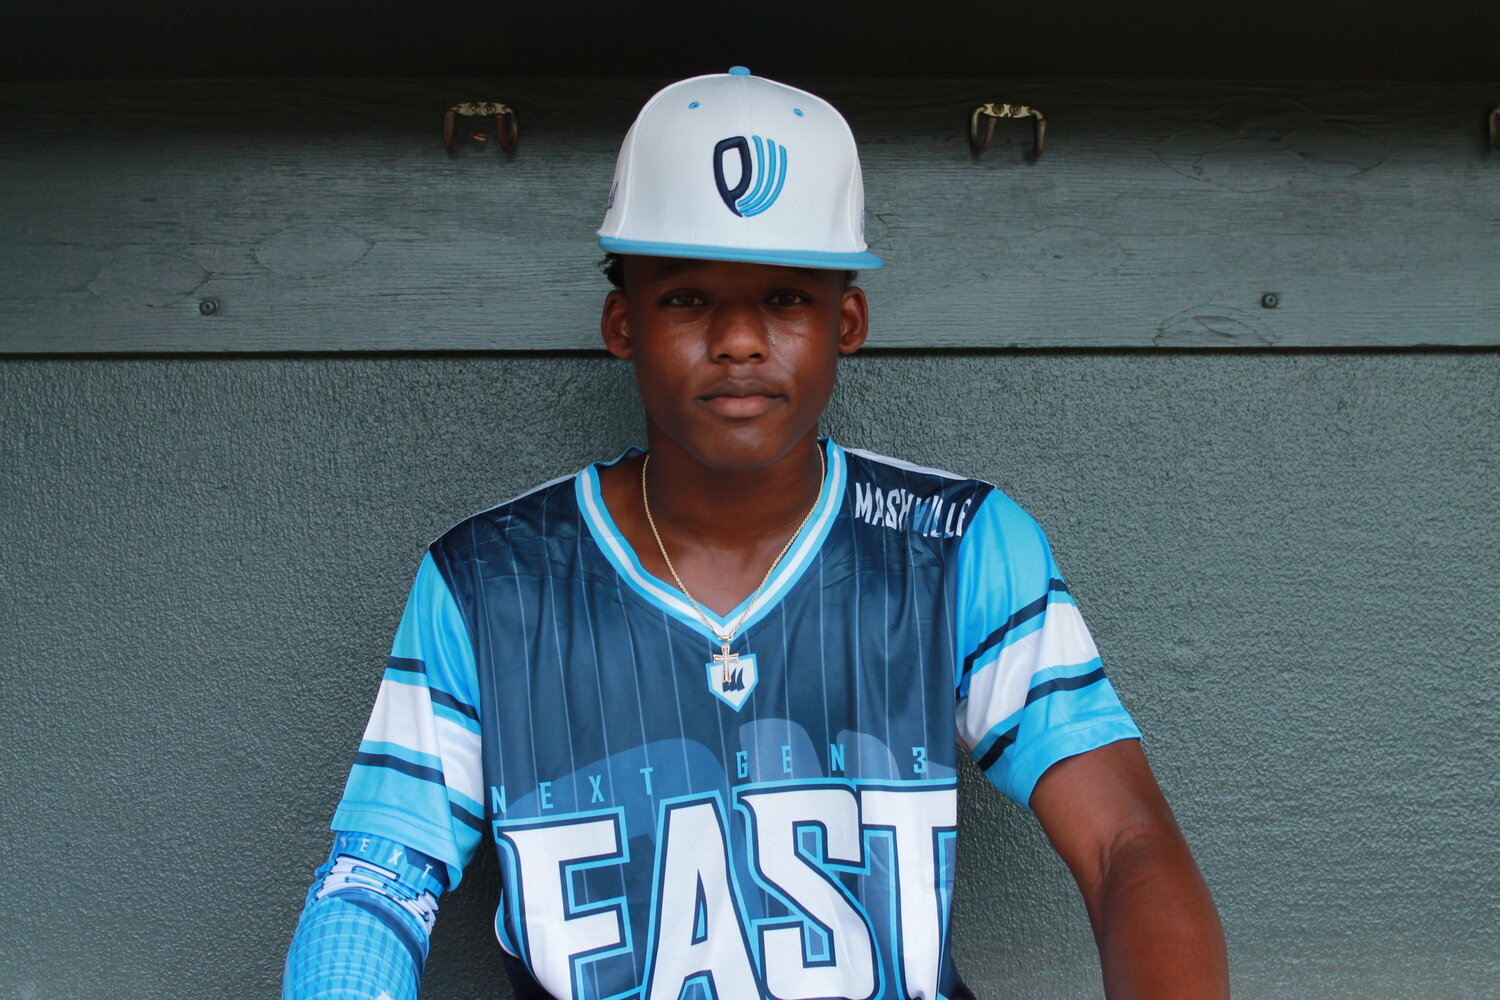 2022 MLB Draft Prospect Elijah Green: Would Be 'Great Feeling' To Be  Selected By Orioles - PressBox